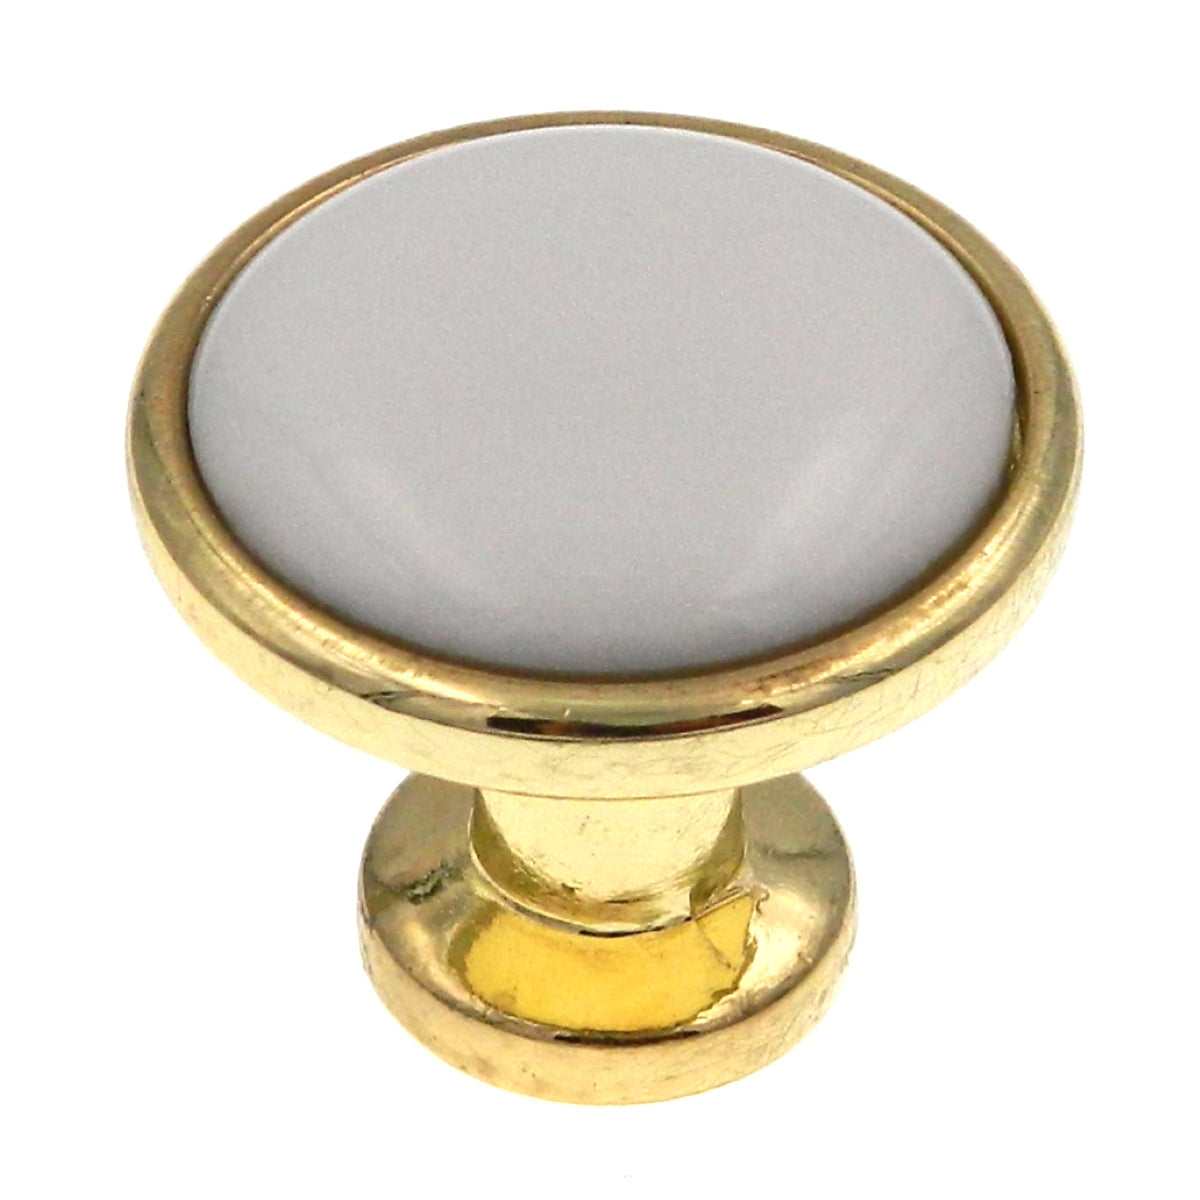 Vintage Round Brass Color Knobs with White Porcelain Center Mushroom Shaped Furniture  Hardware Cabinet Knobs RhymeswithDaughter